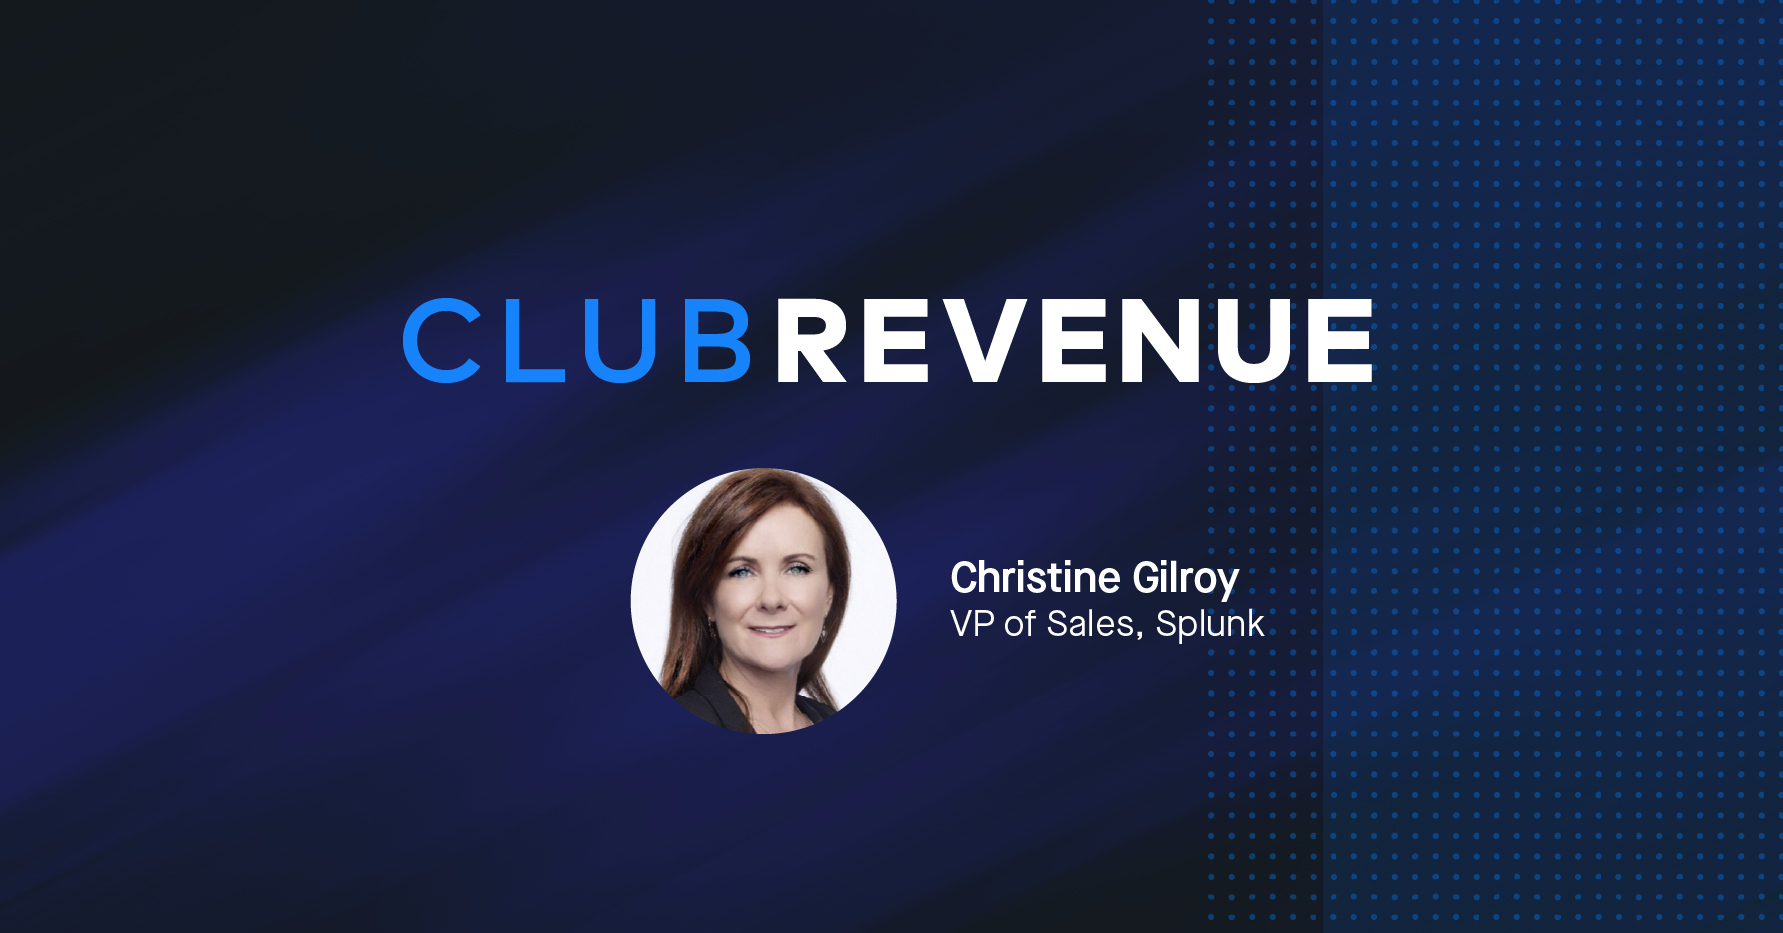 Club Revenue banner featuring Christine Gilroy, VP of Sales at Splunk